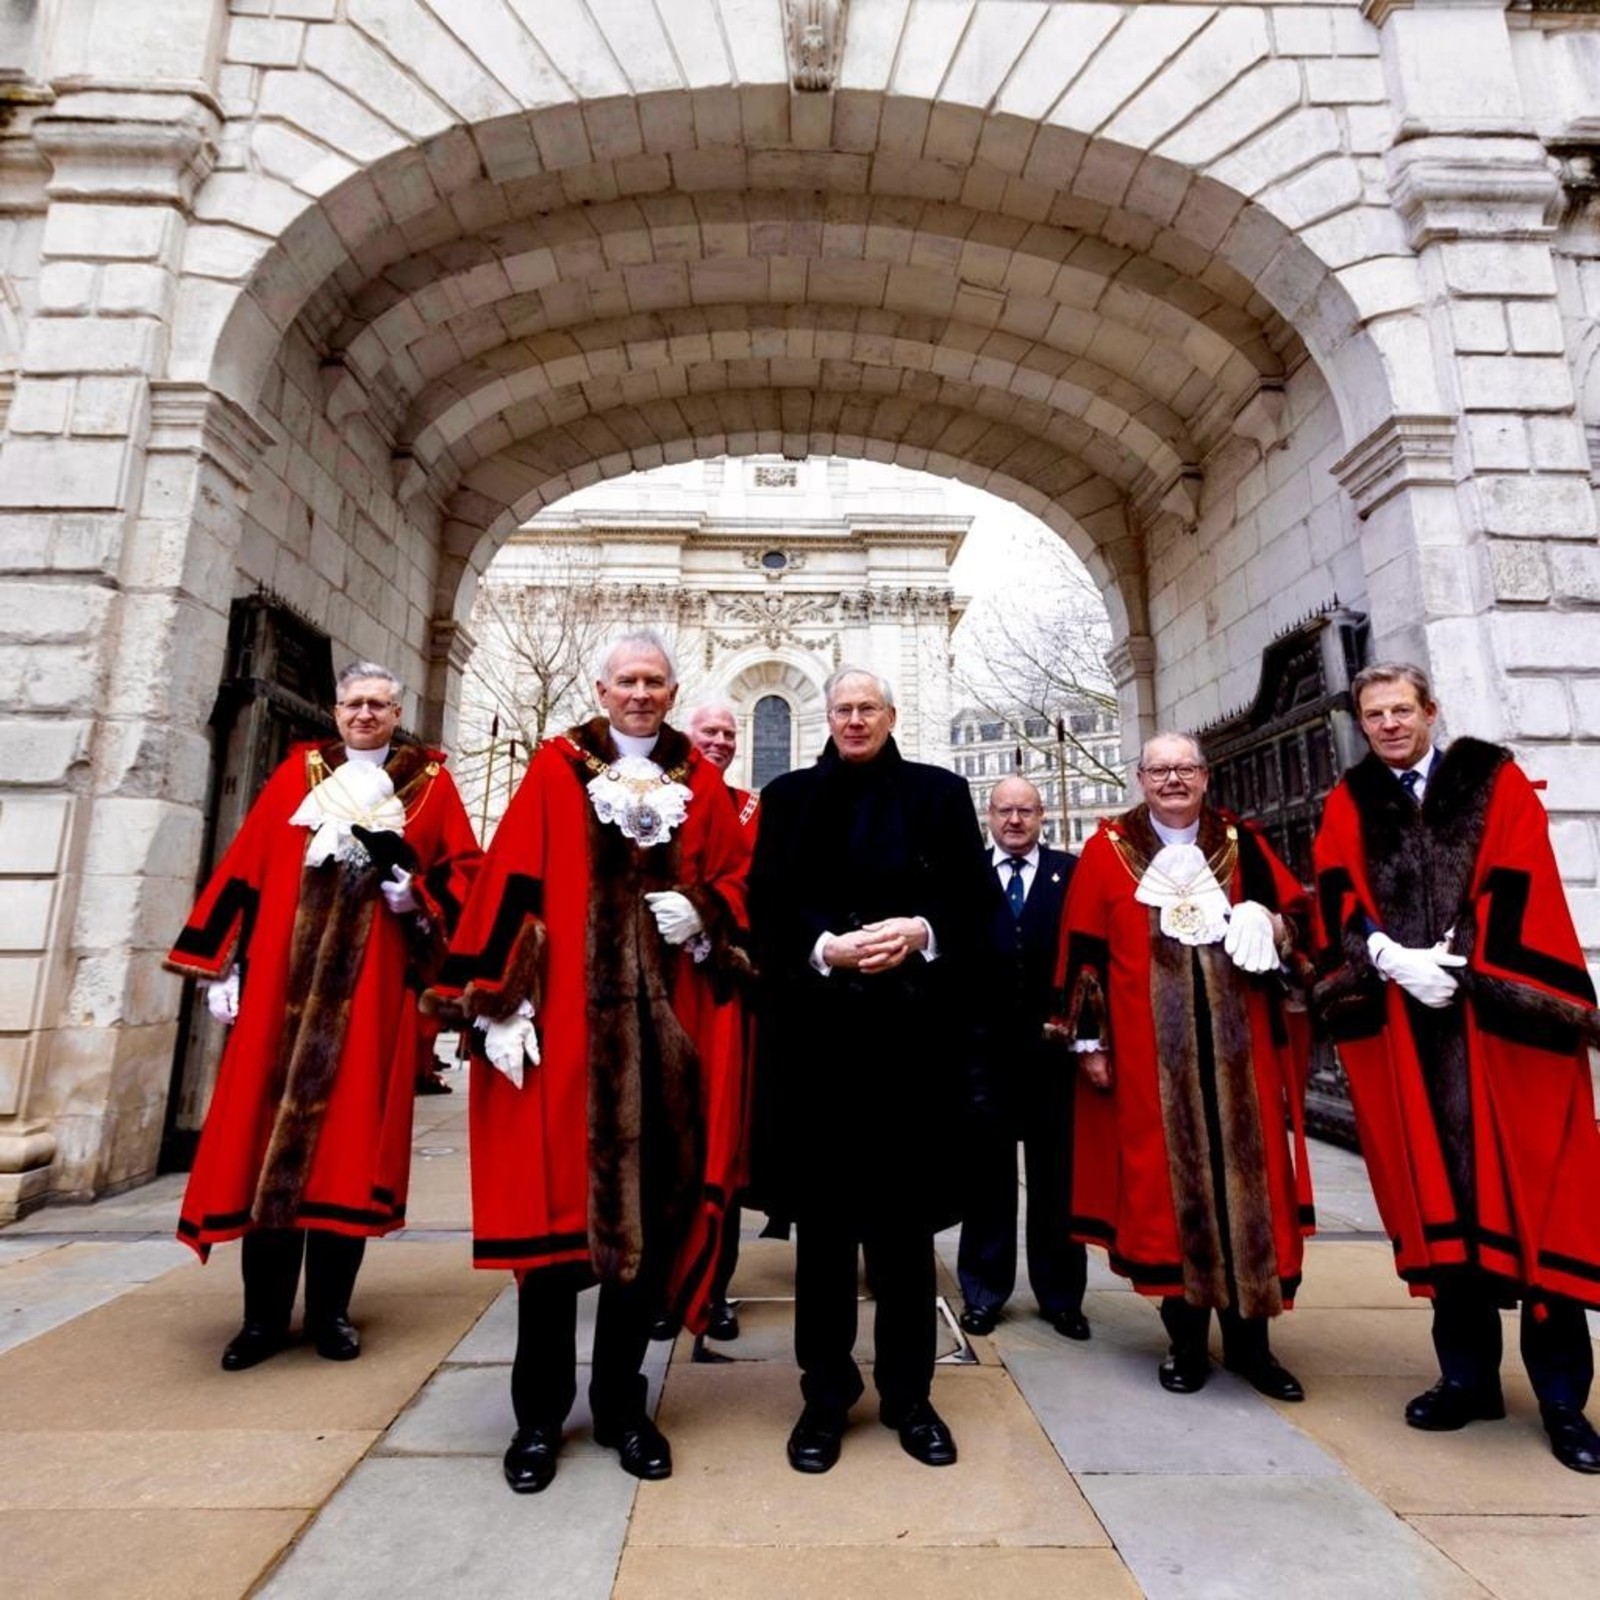 10 Mar 23 - With the Lord Mayor and fellow Sheriff, honoured to attend the traditional Opening of the Temple Bar Gates to the Monarch’s Representative, the Duke of Gloucester.